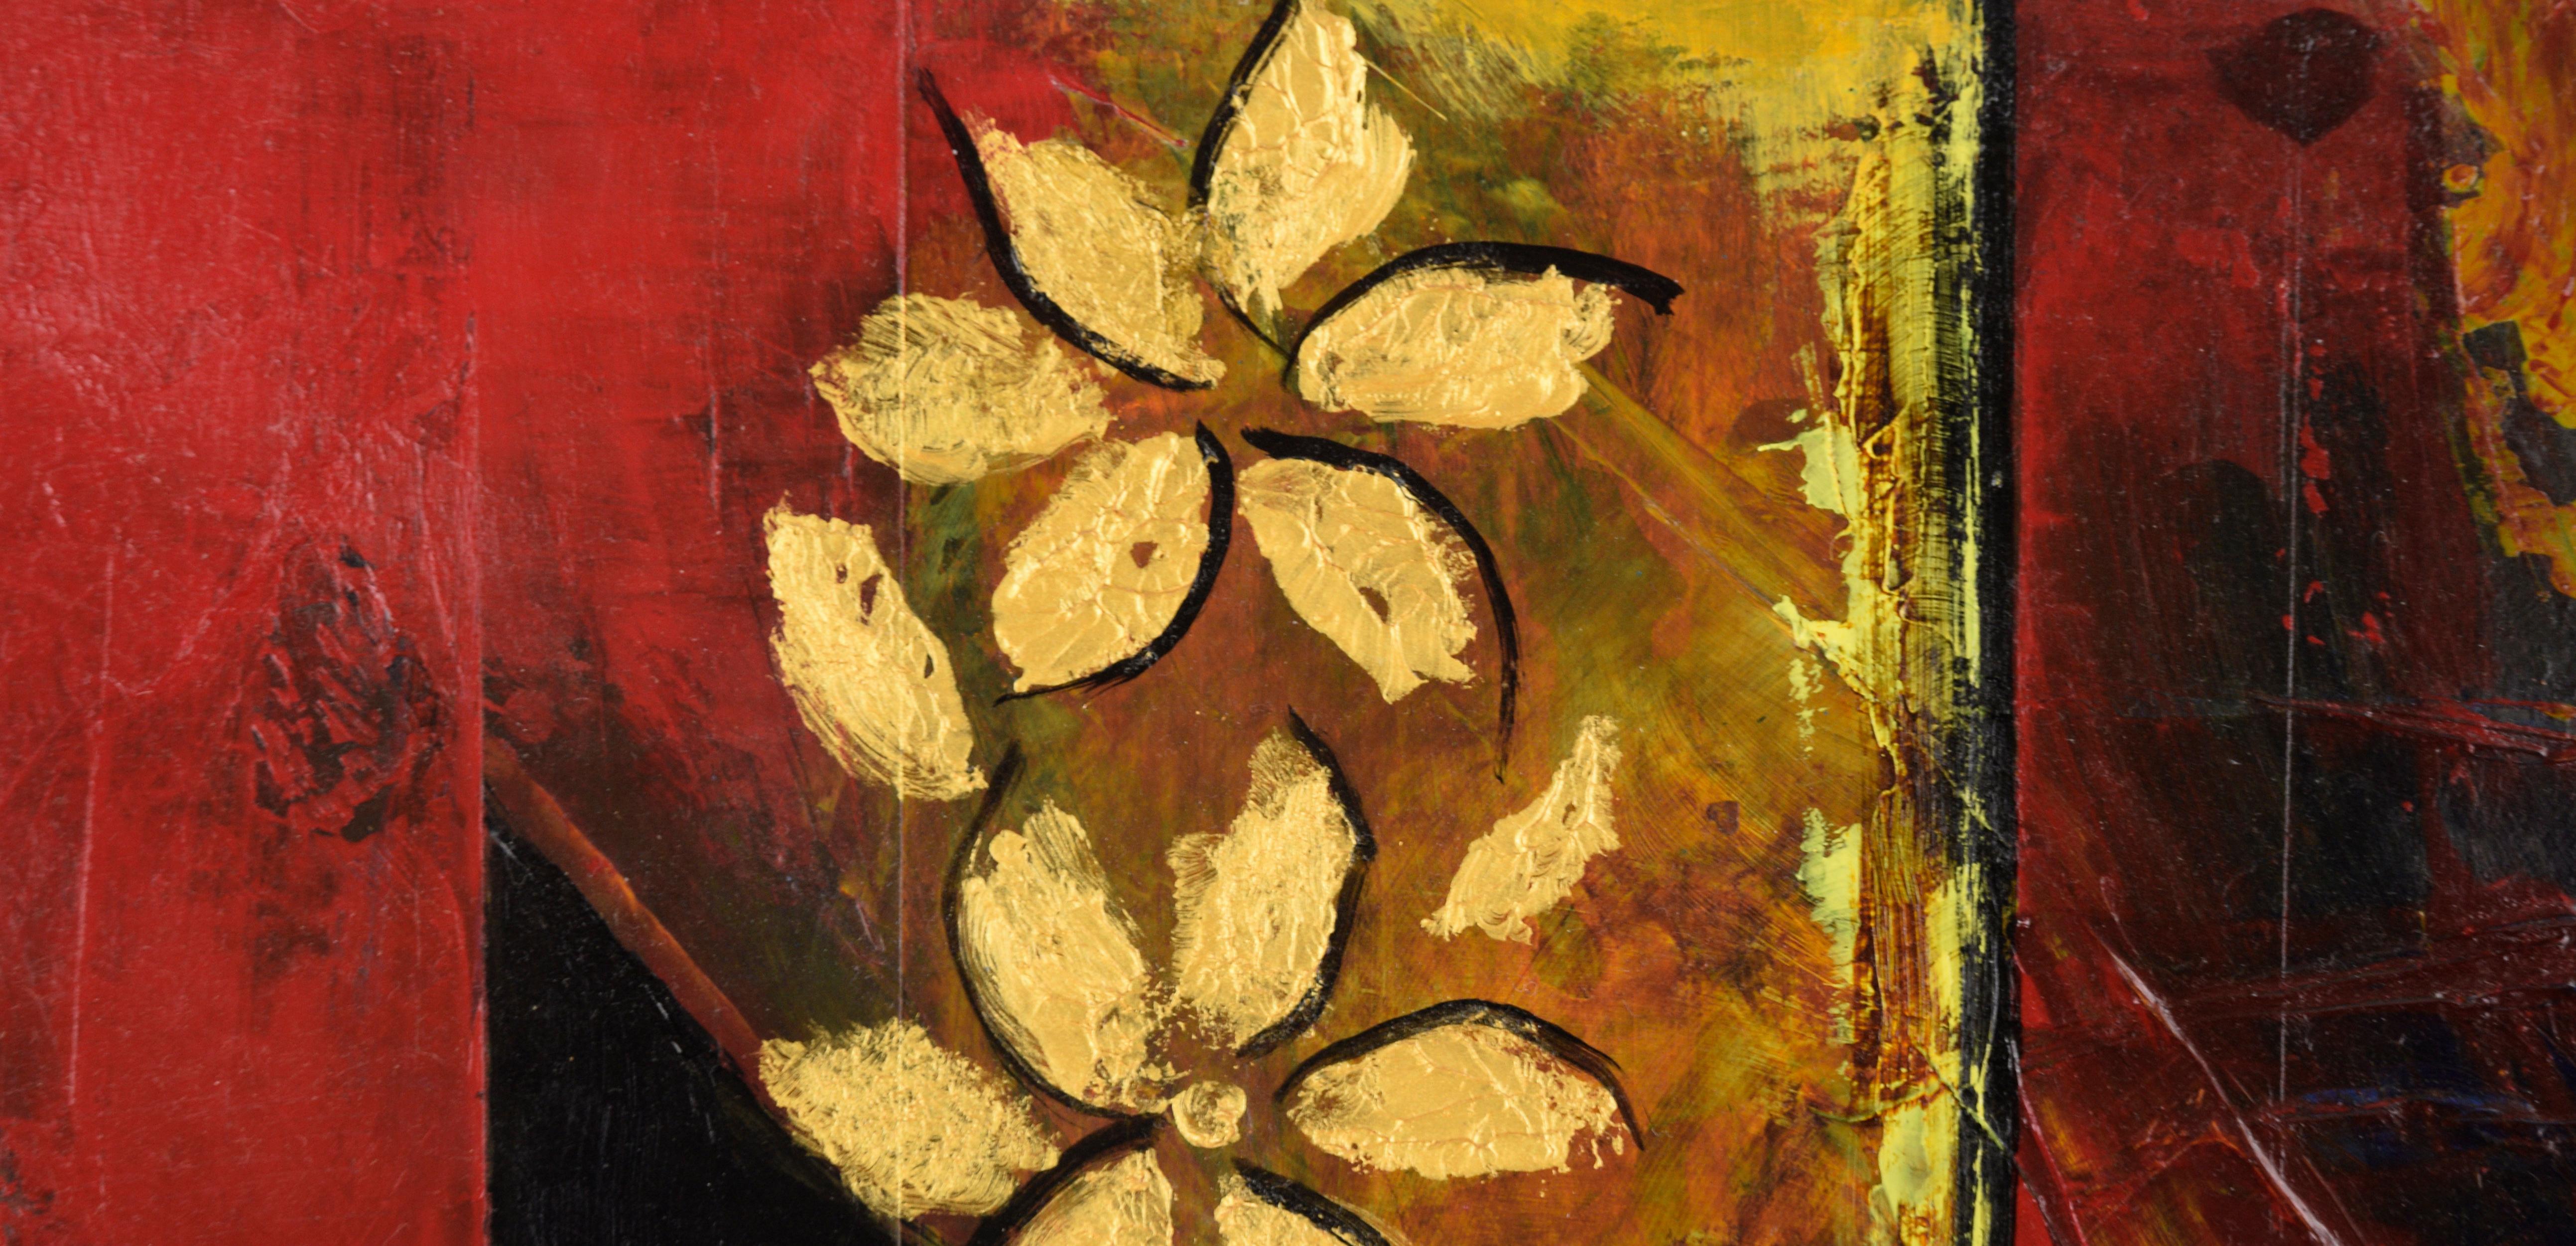 Golden Flowers #1 - Abstract Expressionist - Painting by Renata Rosa